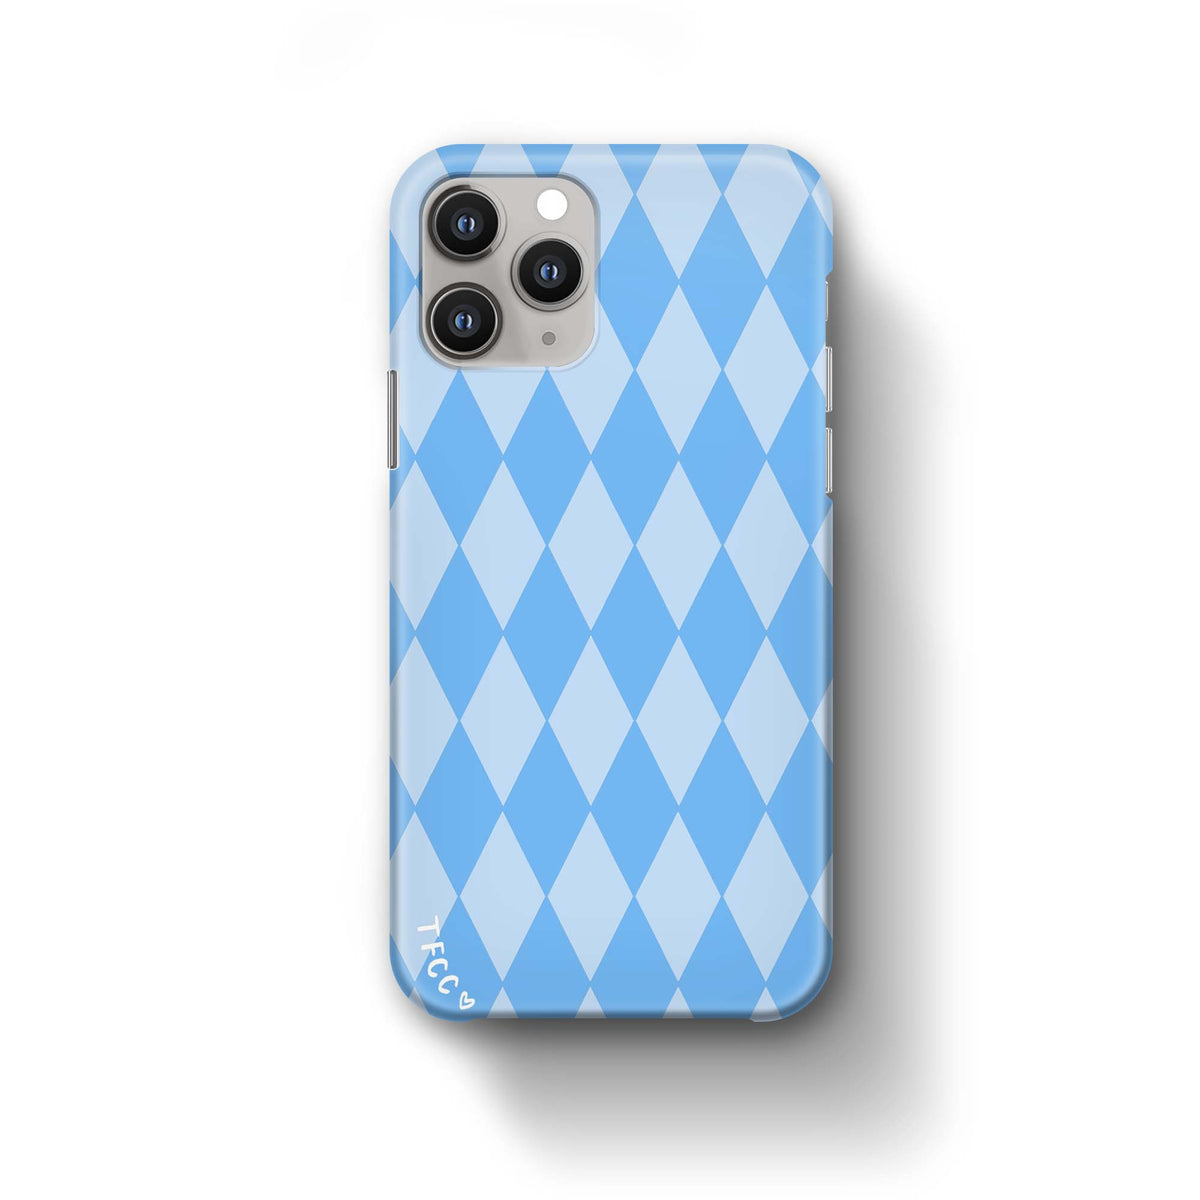 BLUE CHECK CASE - thefonecasecompany